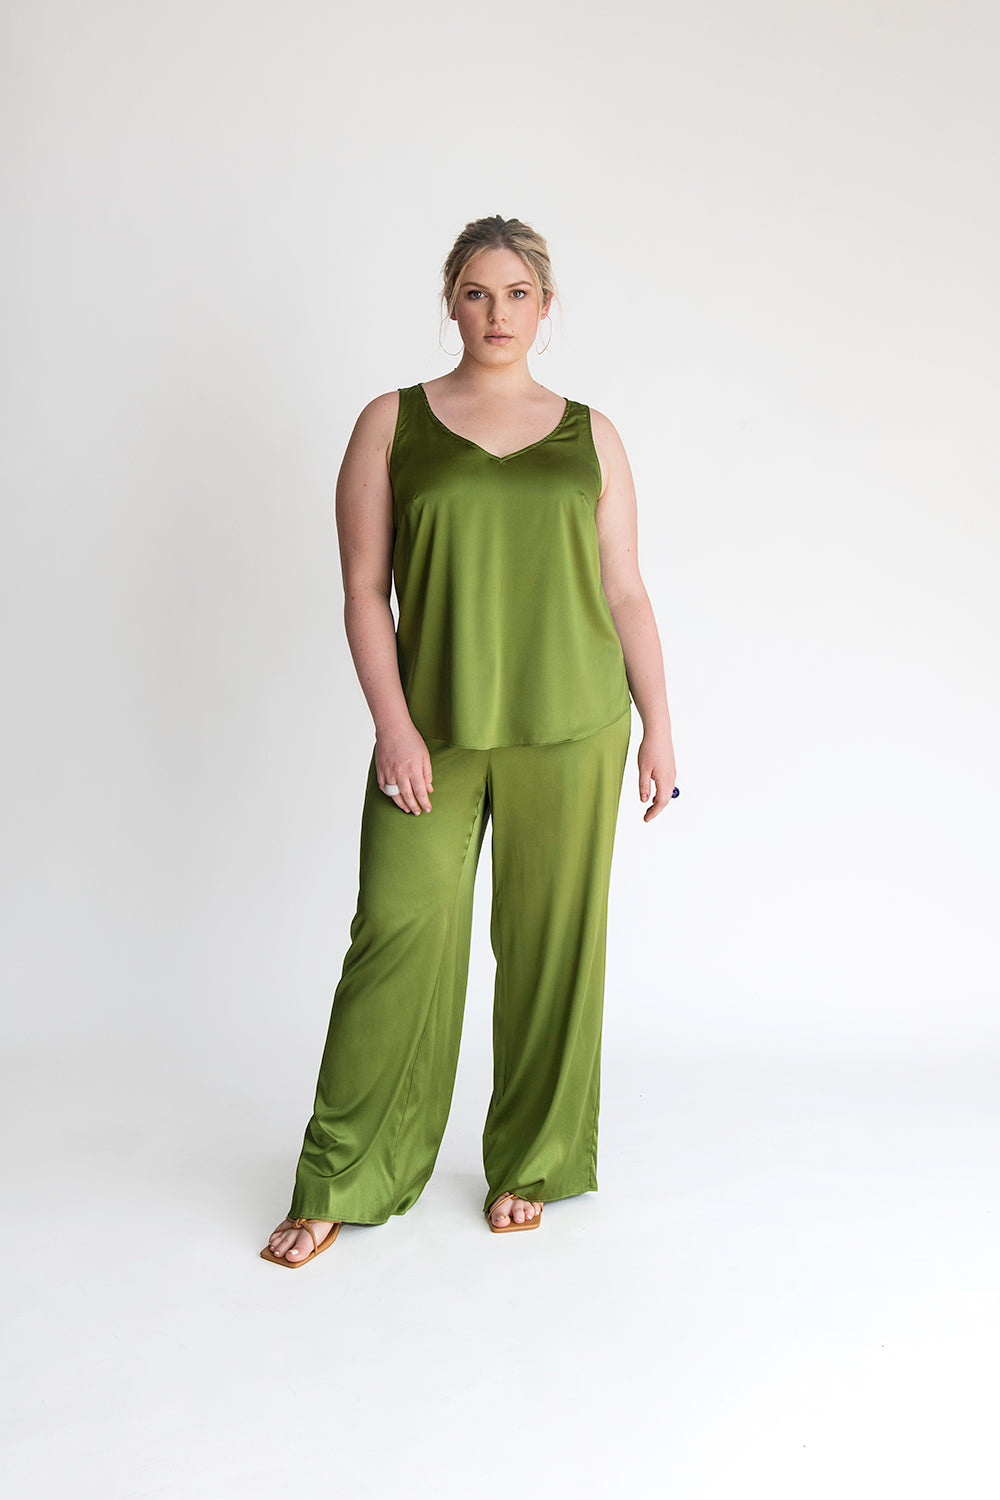 Green palazzo pants outfit